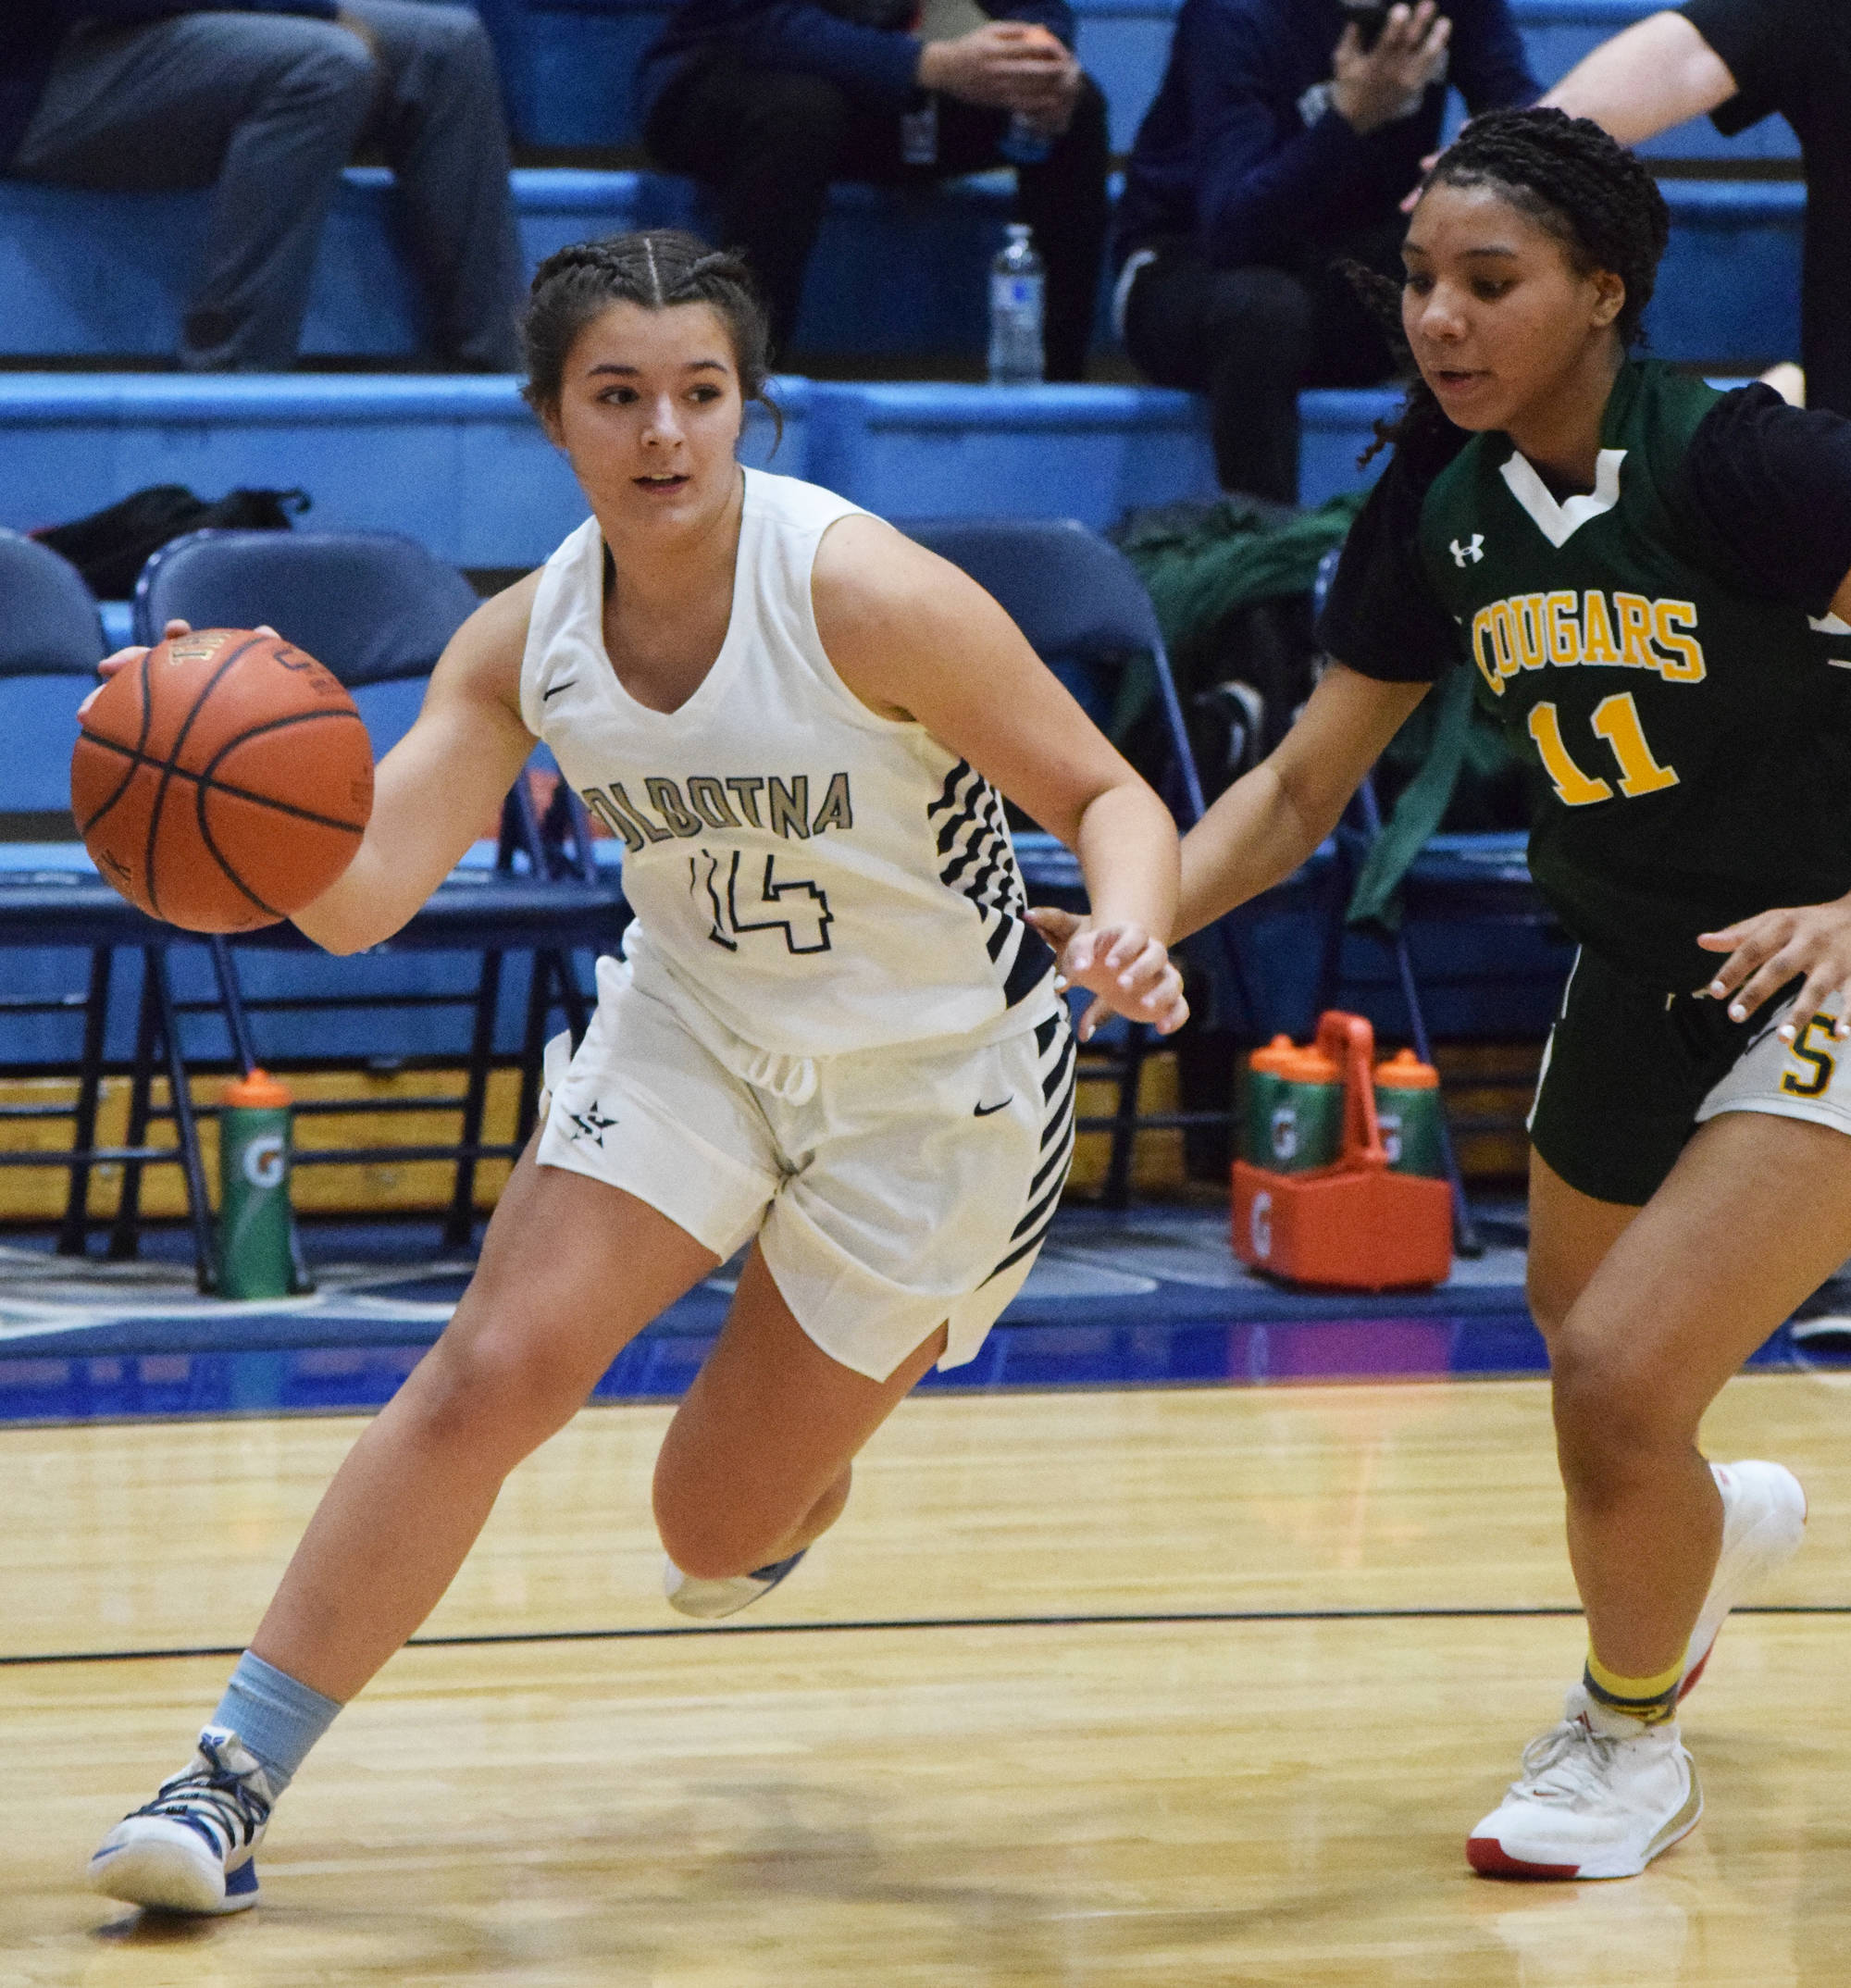 Soldotna’s Mikayla Leadens races around Service defender Neolani Quitugua-Banks, Friday, Dec. 20, 2019, at the Powerade/Al Howard Tip-Off tournament at Soldotna High School. (Photo by Joey Klecka/Peninsula Clarion)